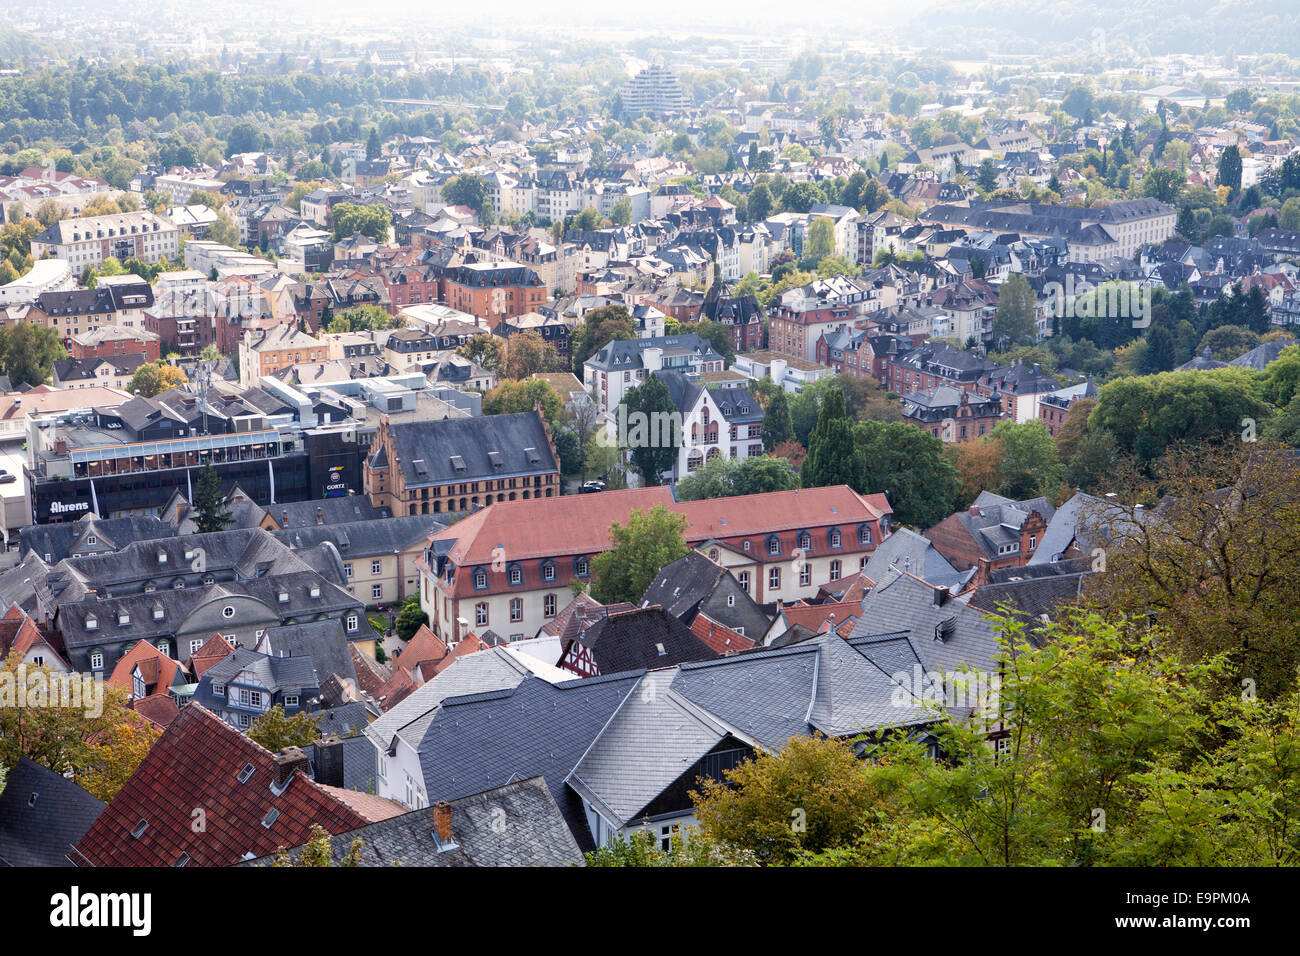 Overlooking the roofs of the historic centre, Marburg, Hesse, Germany, Europe, Stock Photo